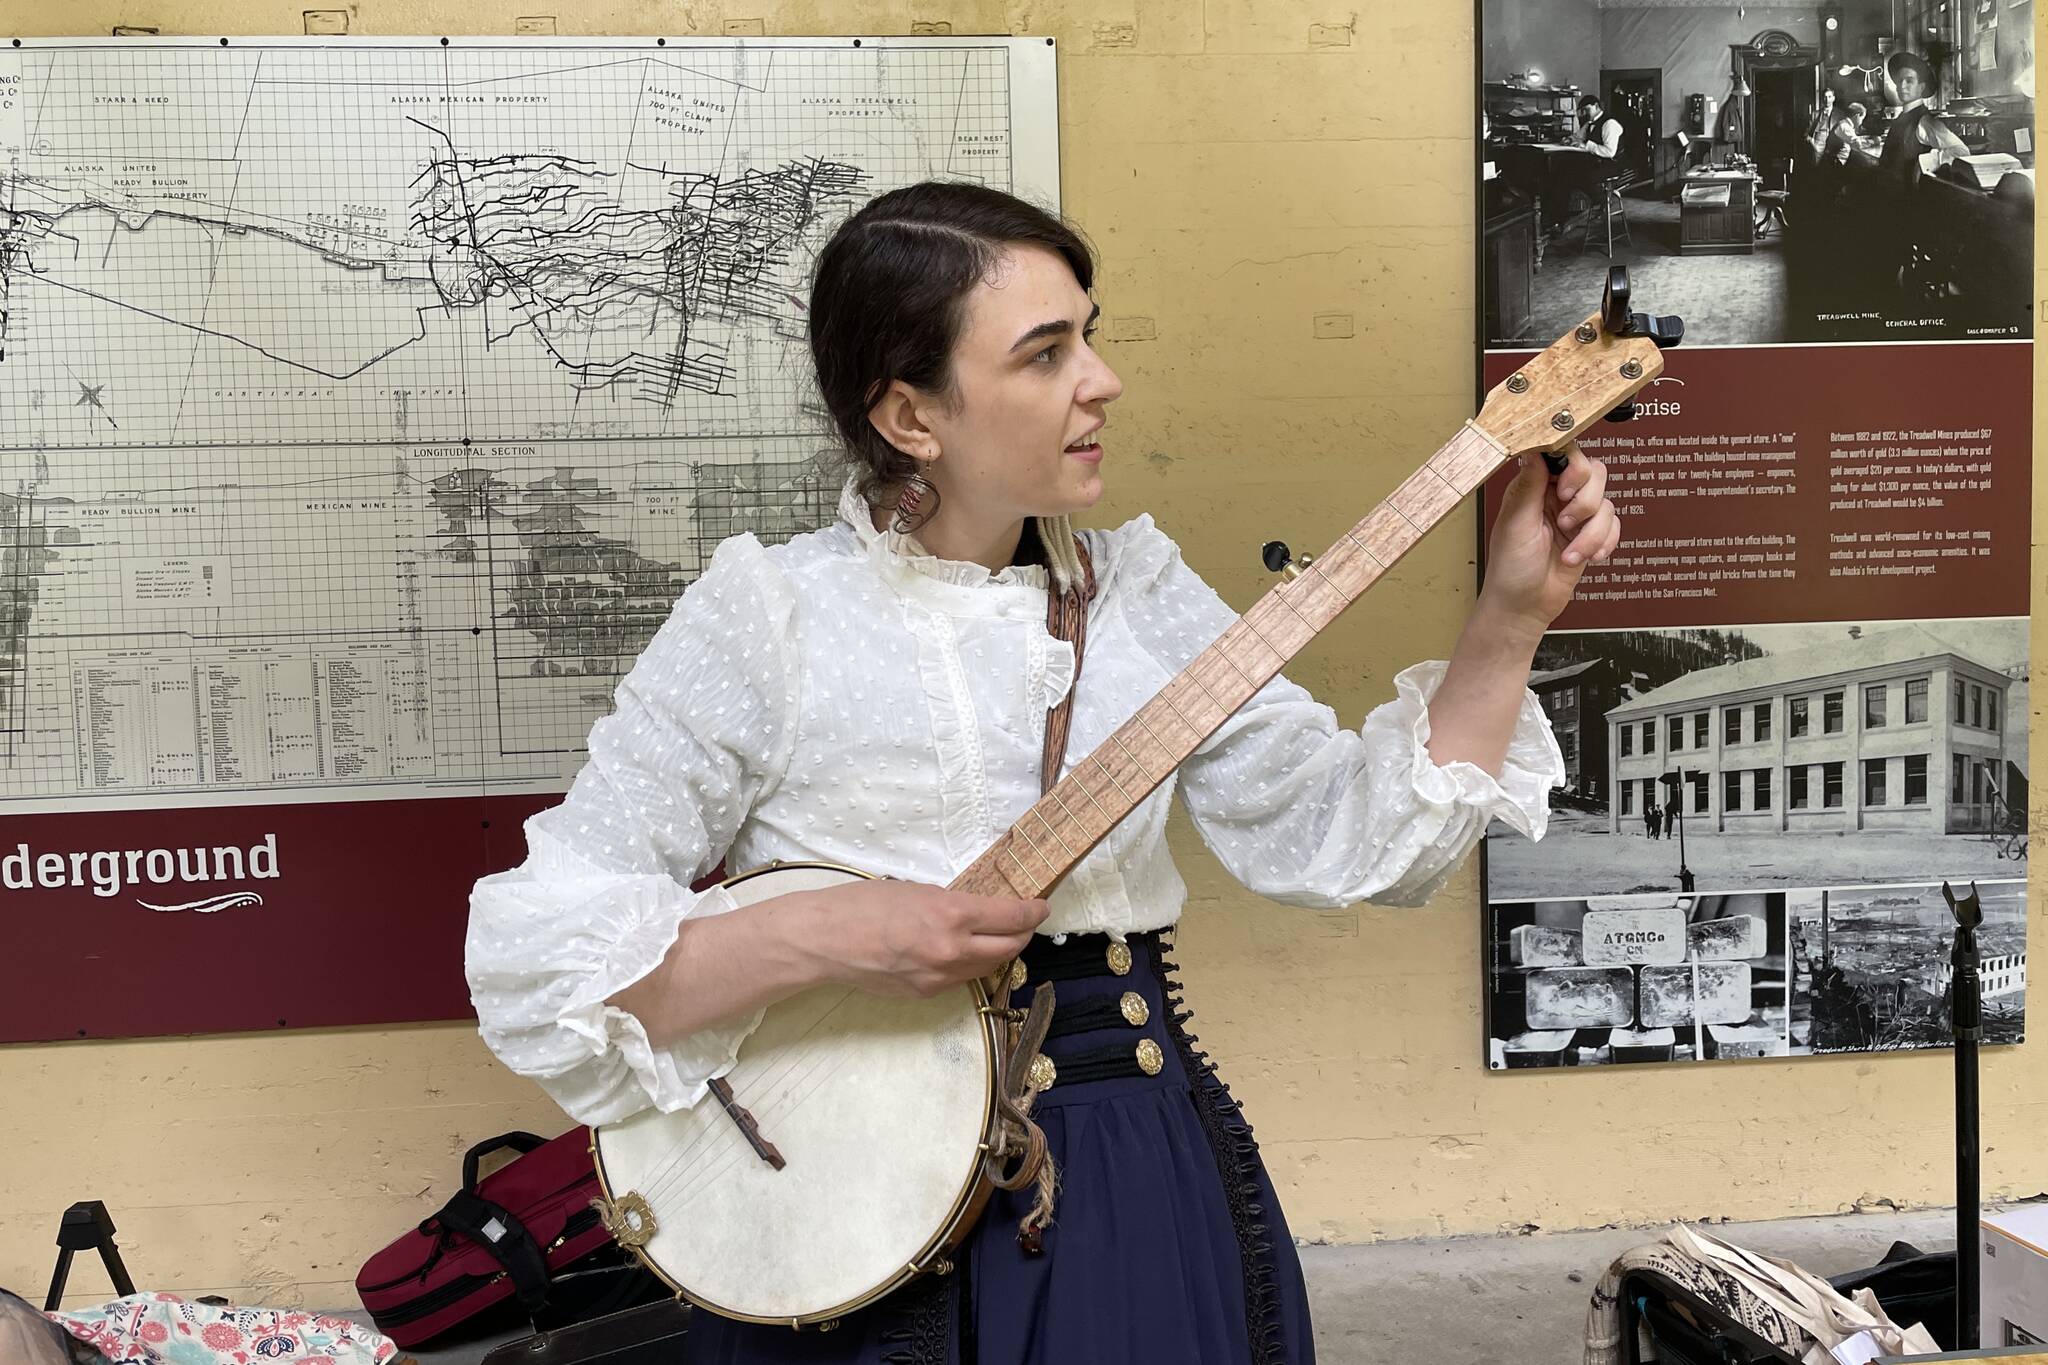 Annie Bartholomew prepares her banjo for rehearsal for her Victorian folk opera, “Sisters of White Chapel,” at the Treadwell Mine Office on July 5, 2022. (Michael S. Lockett / Juneau Empire)